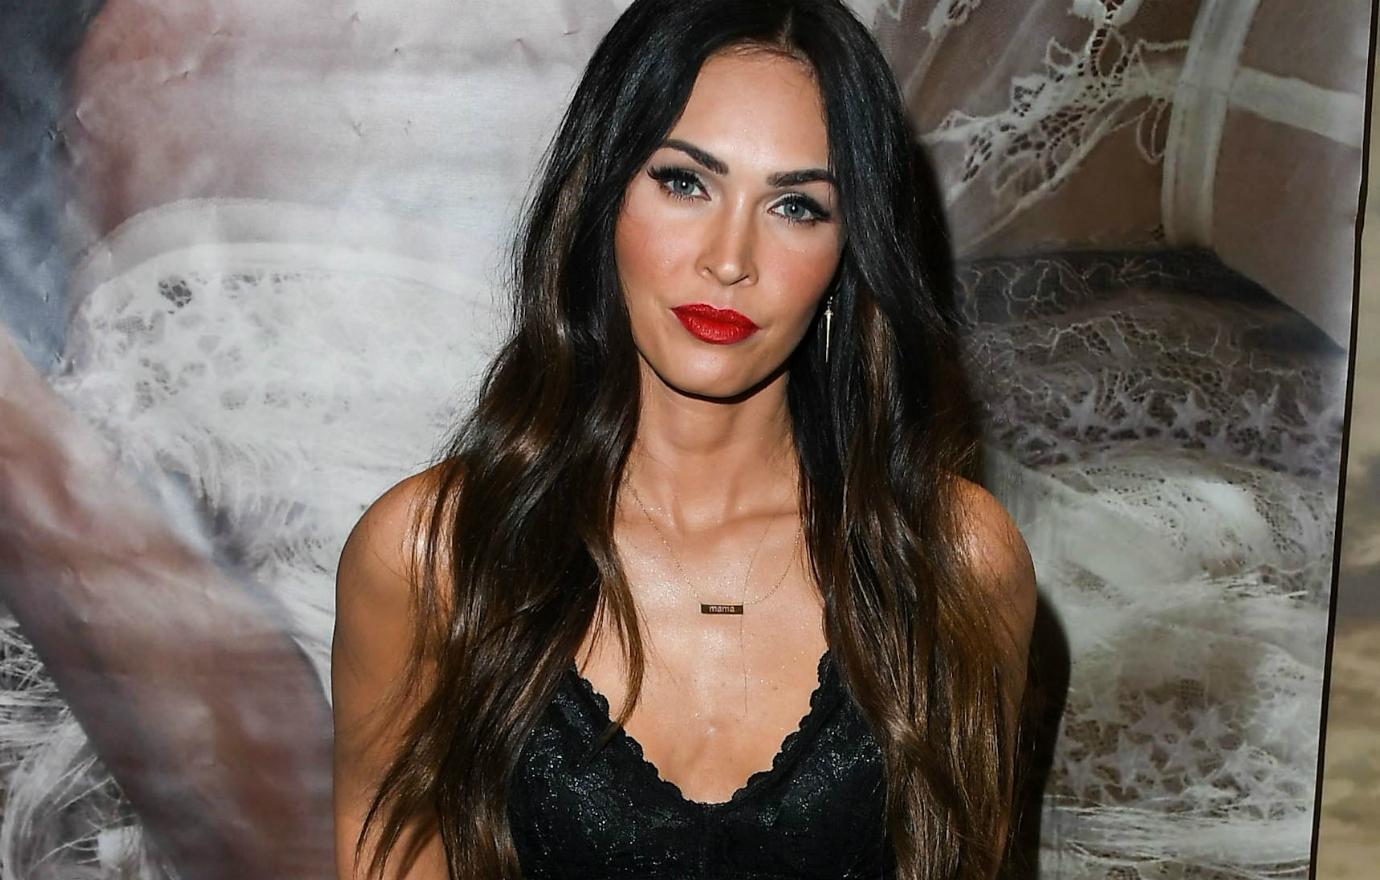 Megan Fox wears a black dress with scalloped neckline, hair long and wavy, and red lip at this 2018 Forever 21 appearance.